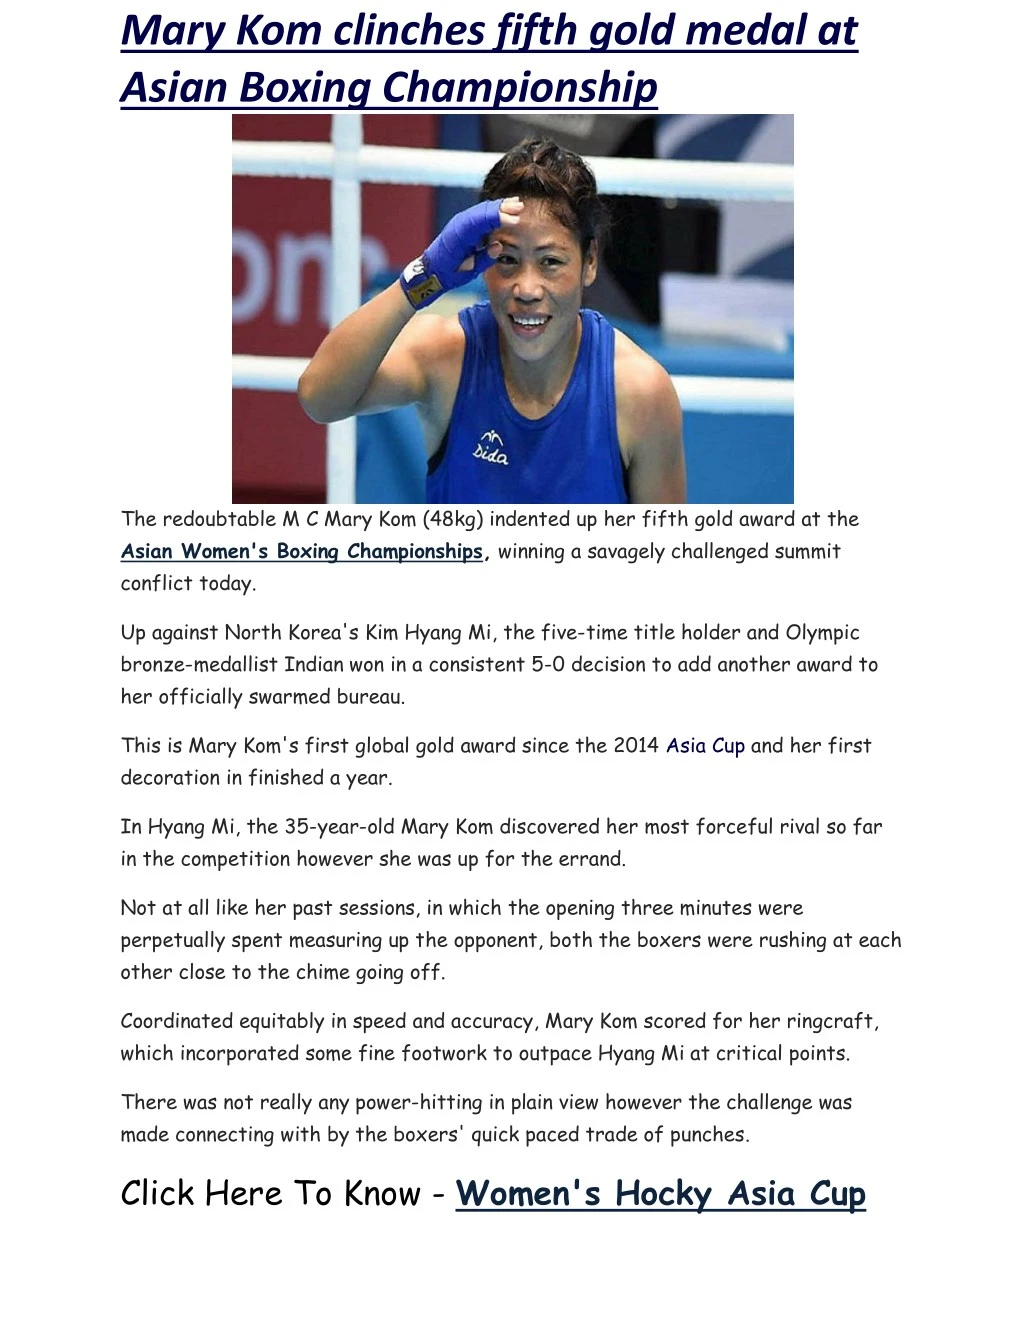 mary kom clinches fifth gold medal at asian